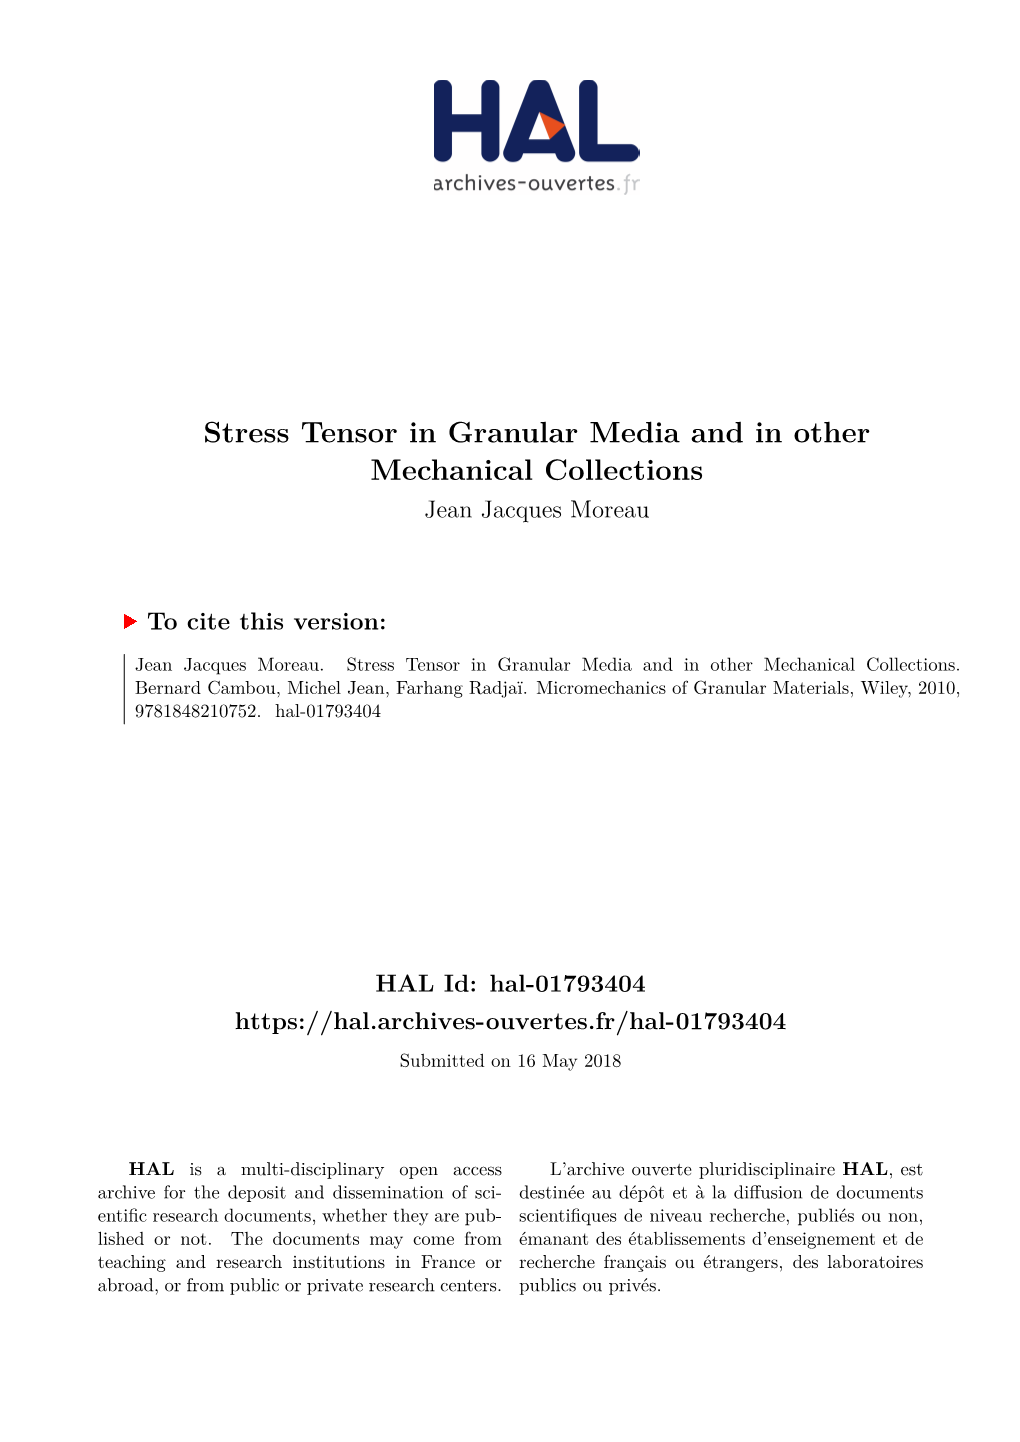 Stress Tensor in Granular Media and in Other Mechanical Collections Jean Jacques Moreau